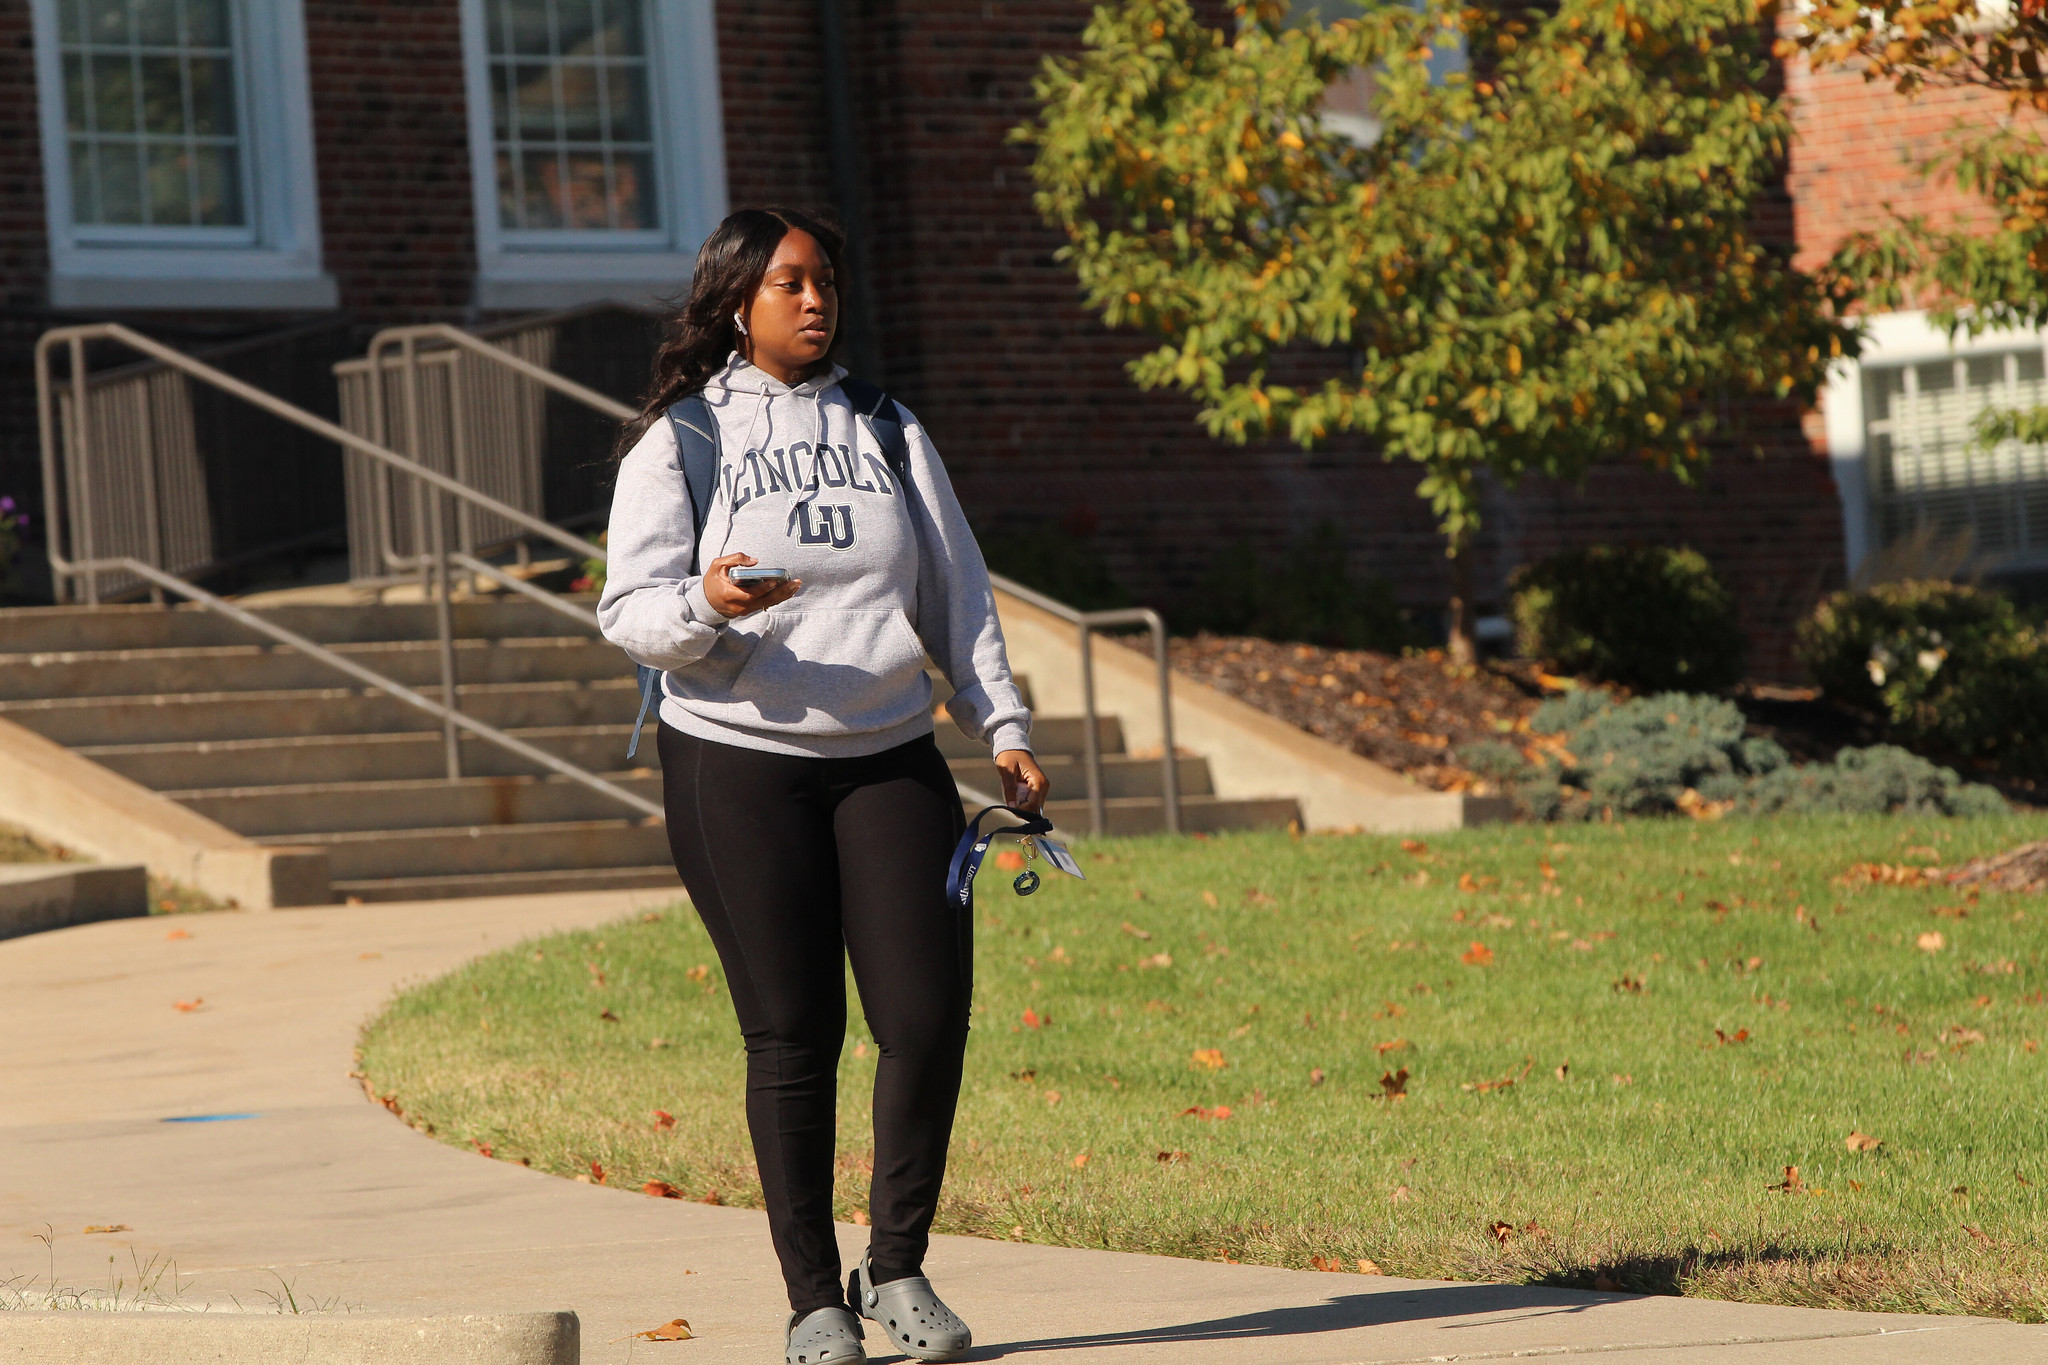 Lincoln University of Missouri Students to Benefit from $2.9 Million National Telecommunications and Information Administration Grant